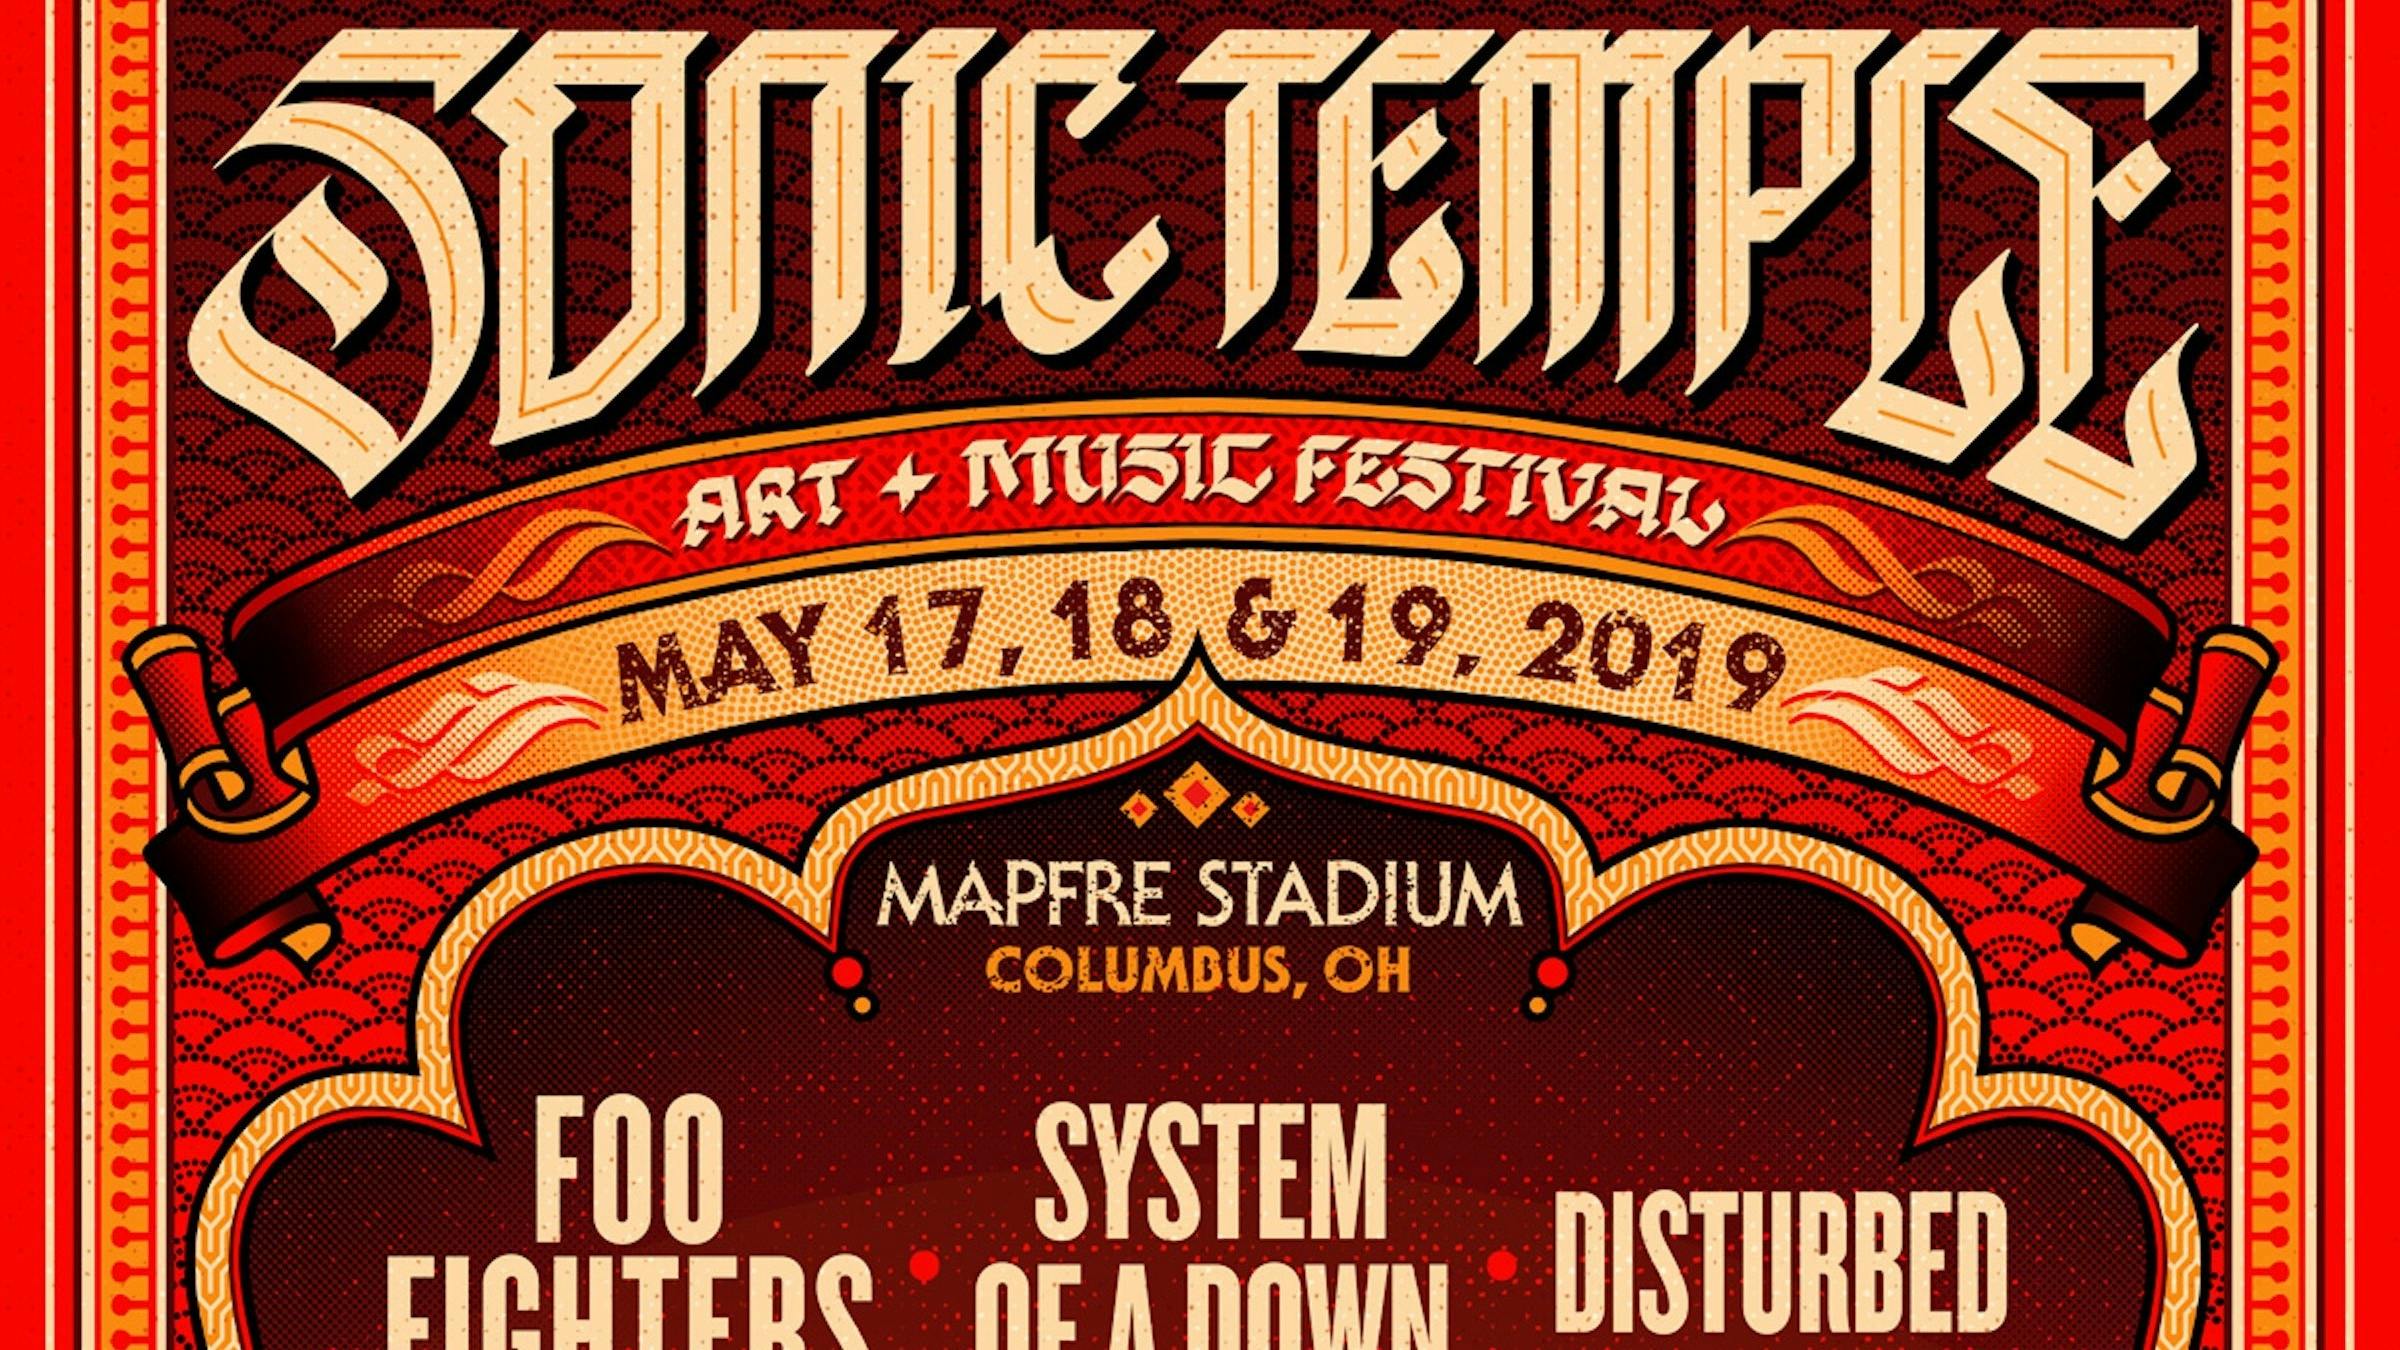 Foo Fighters, System Of A Down, And Disturbed To Headline FirstEver